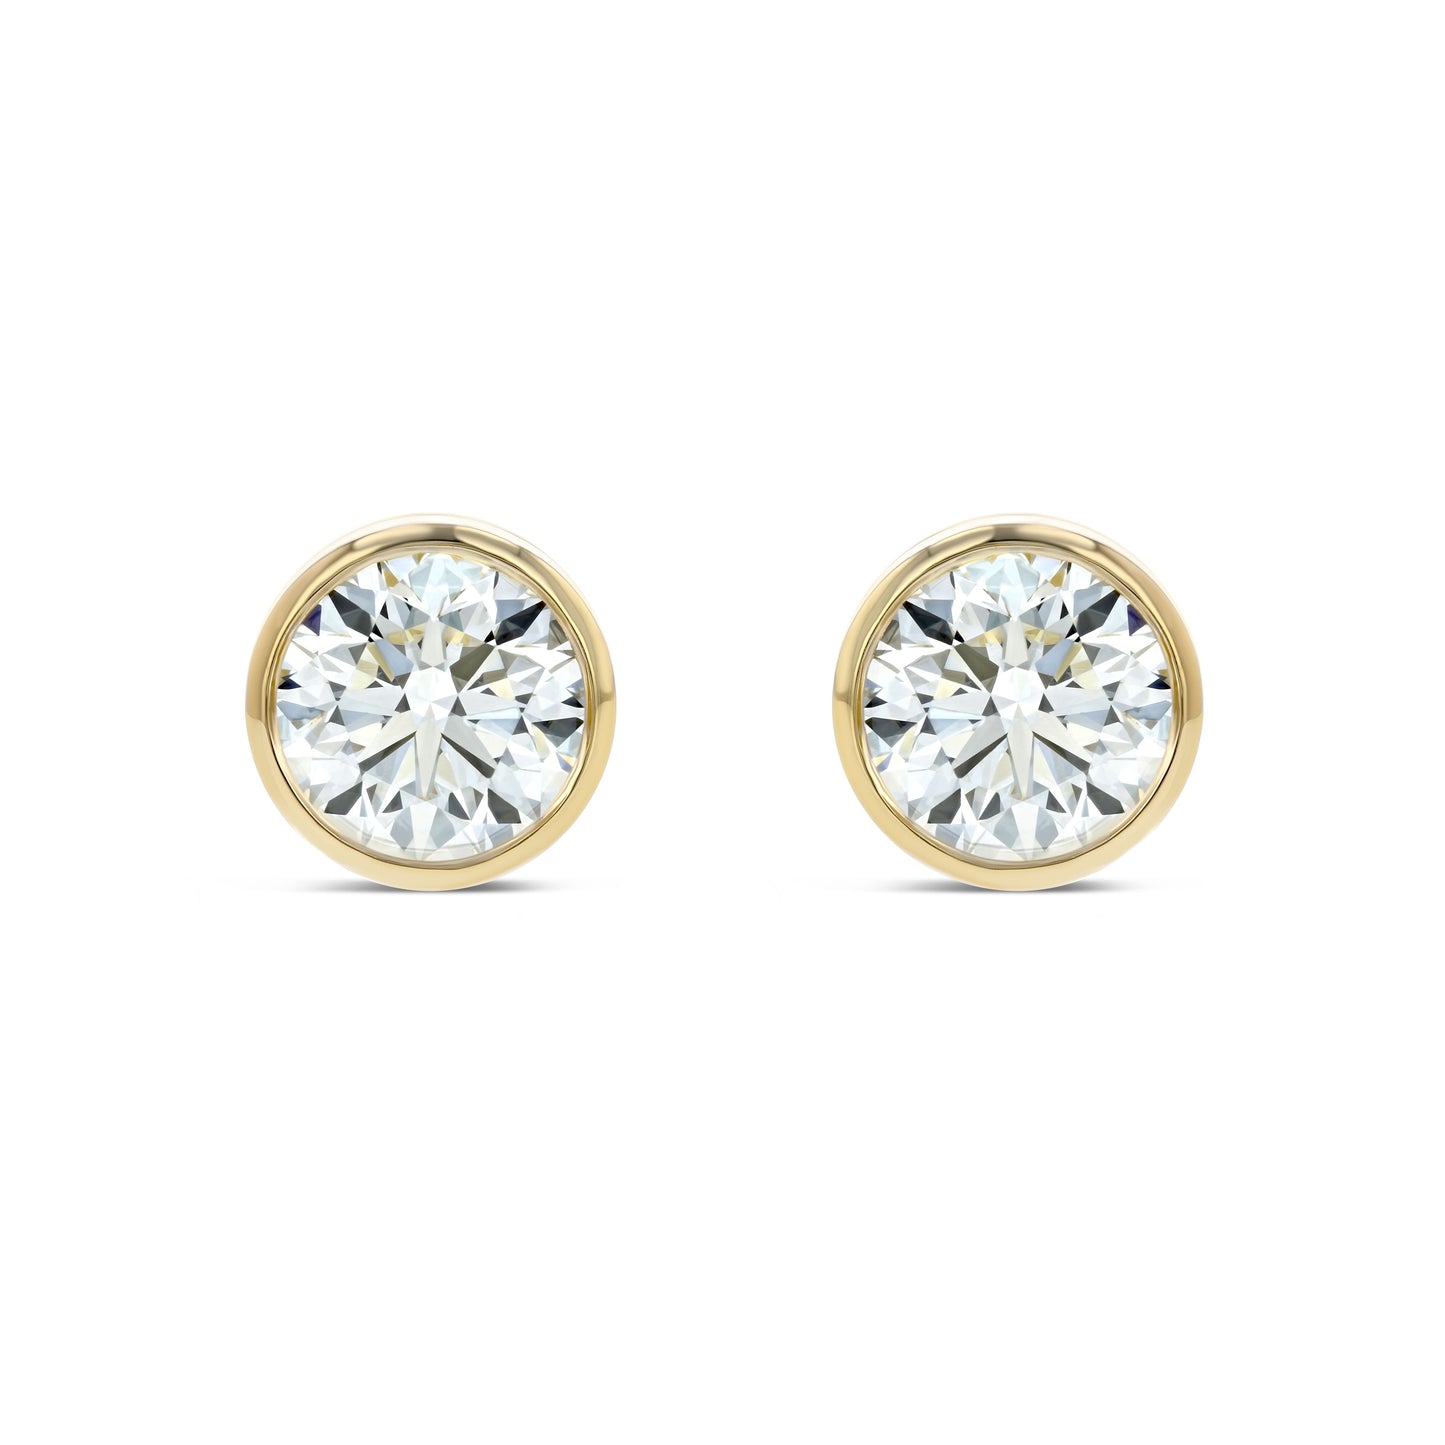 14k Yellow Gold Bezel Round Diamond Stud Earrings 1/2ctw (4.1mm Ea), M-n Color, Si2-si3 Clarity